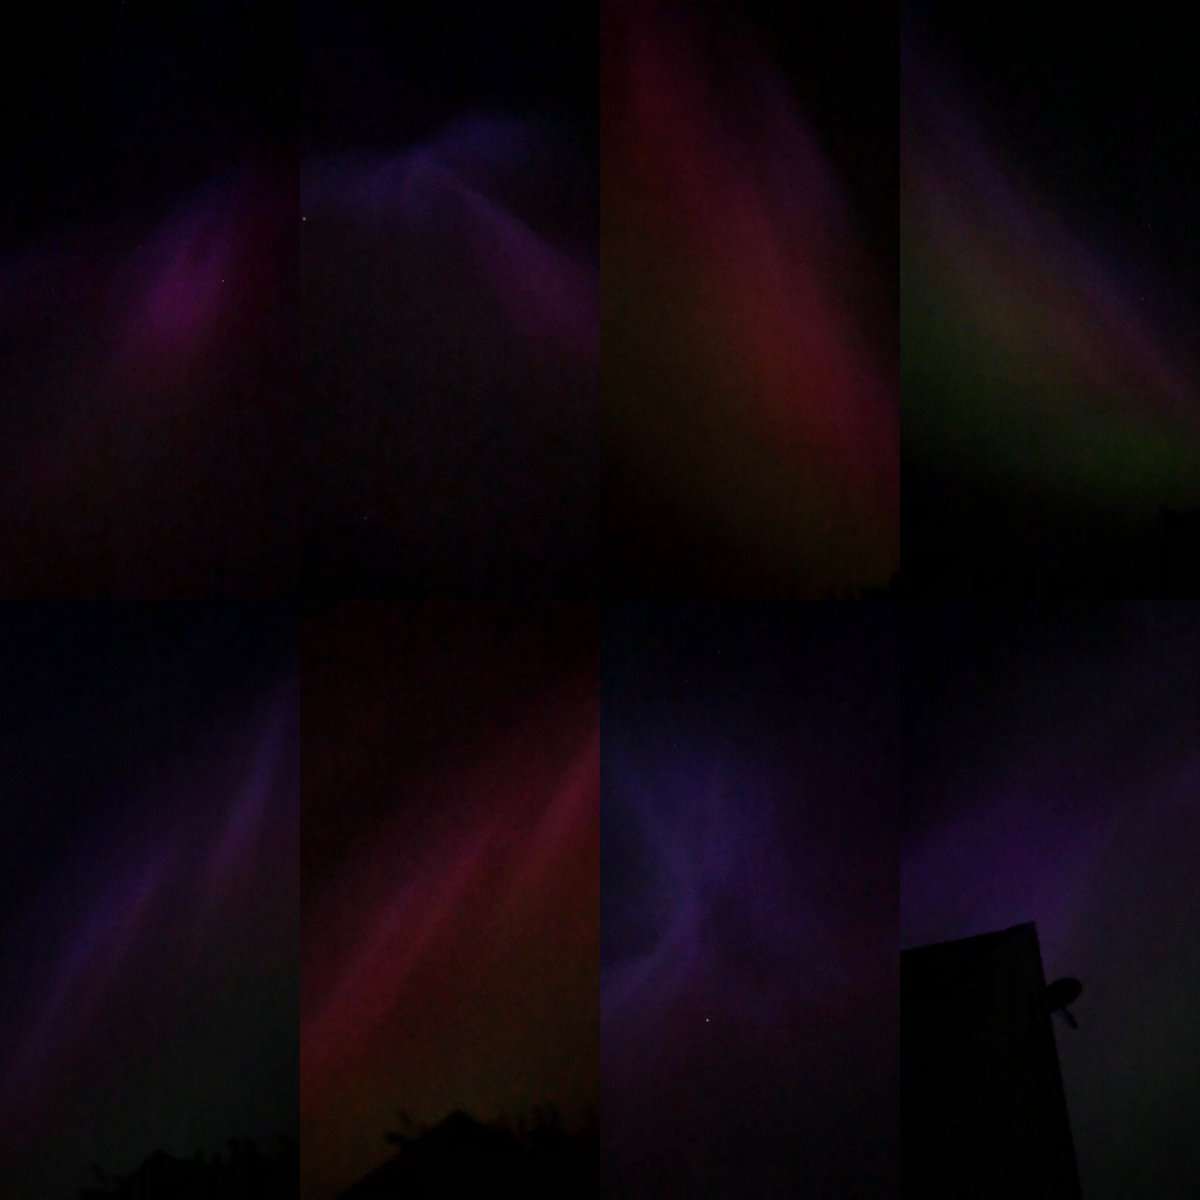 Some aurora borealis colours from this evening. Doesn’t do it justice!